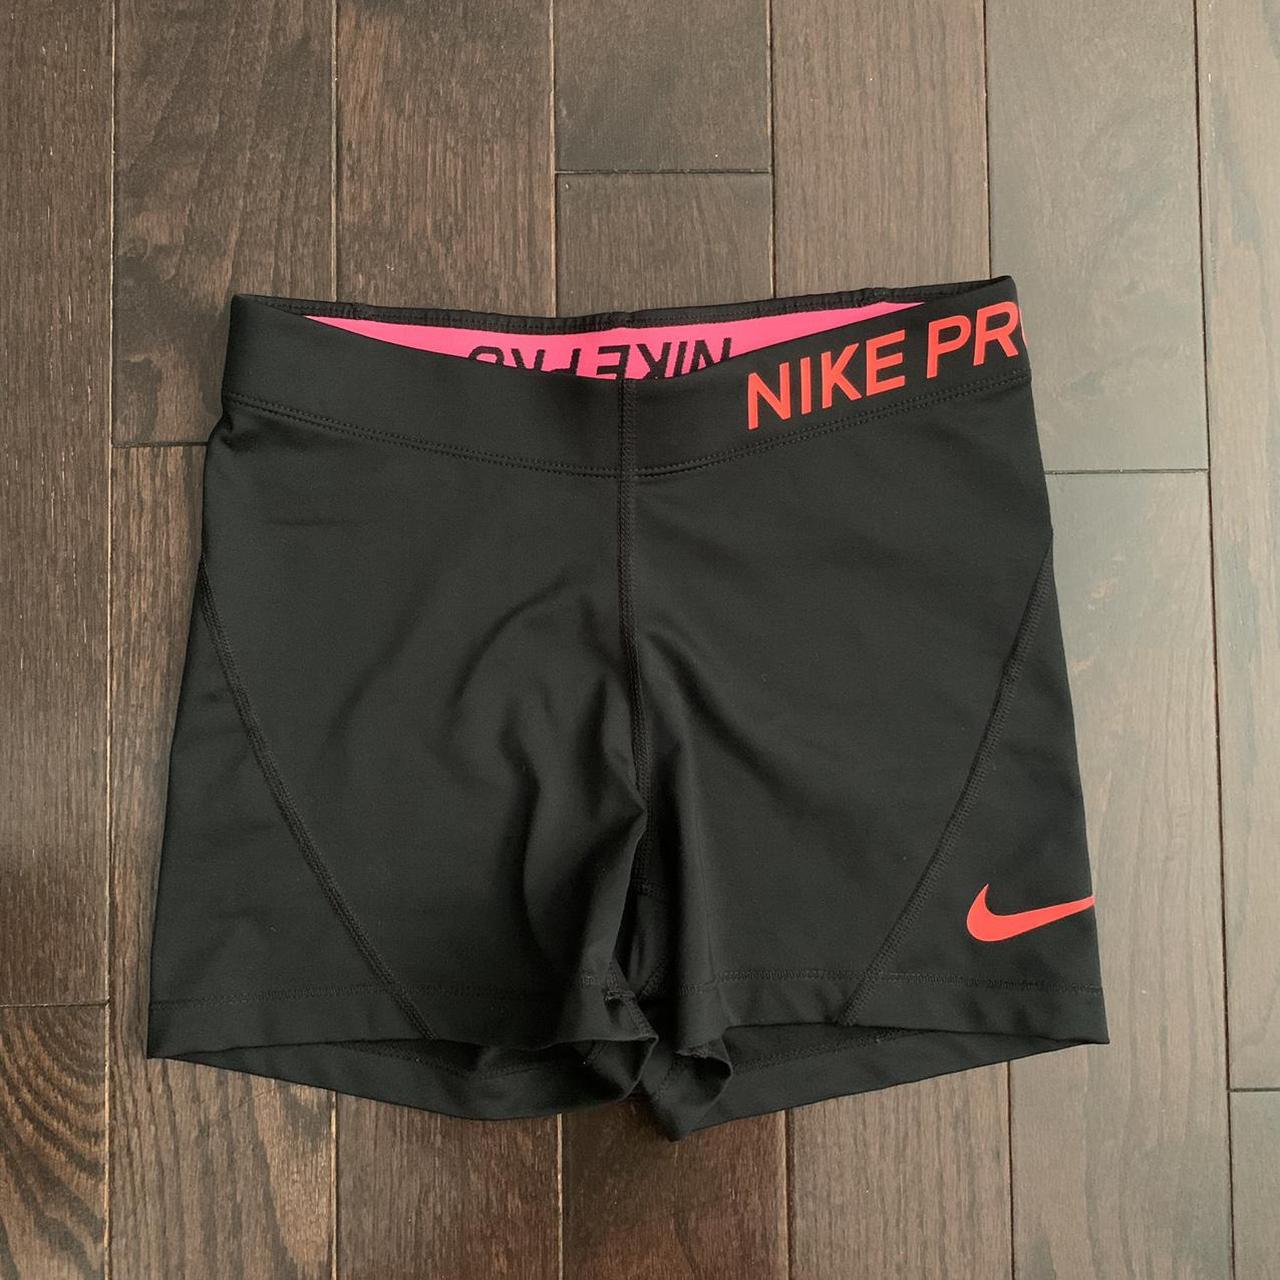 Nike Women's Black and Pink Shorts